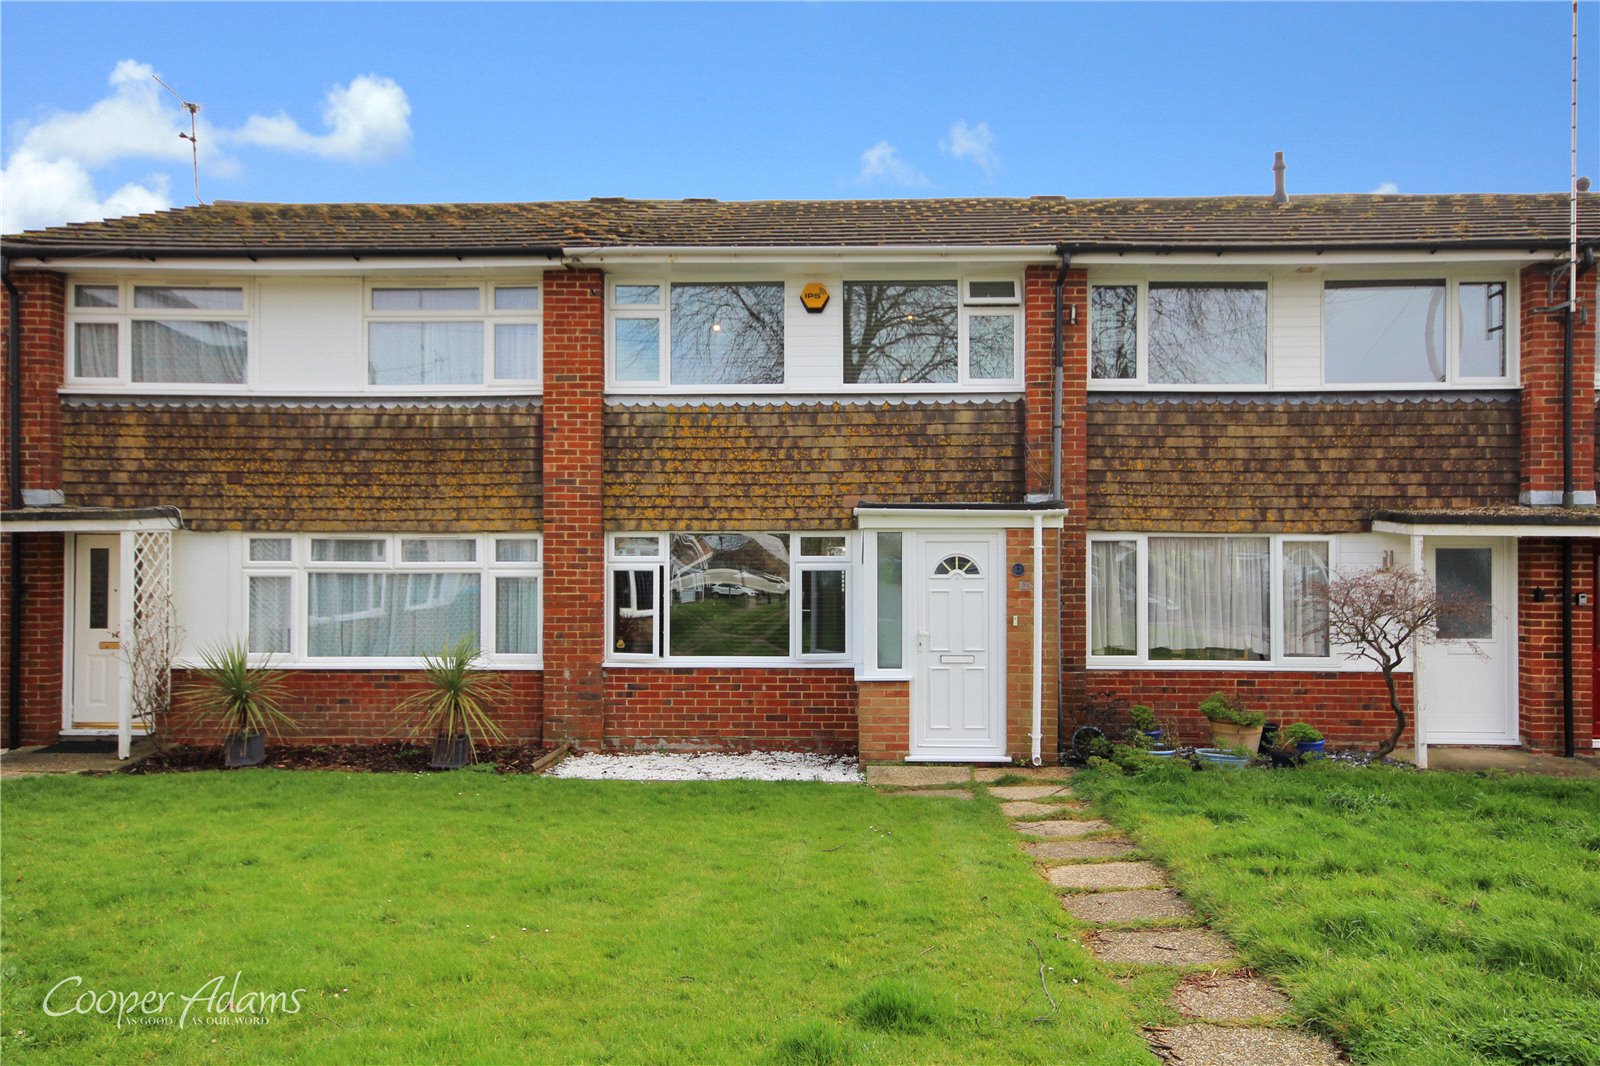 3 bed house for sale - Property Image 1